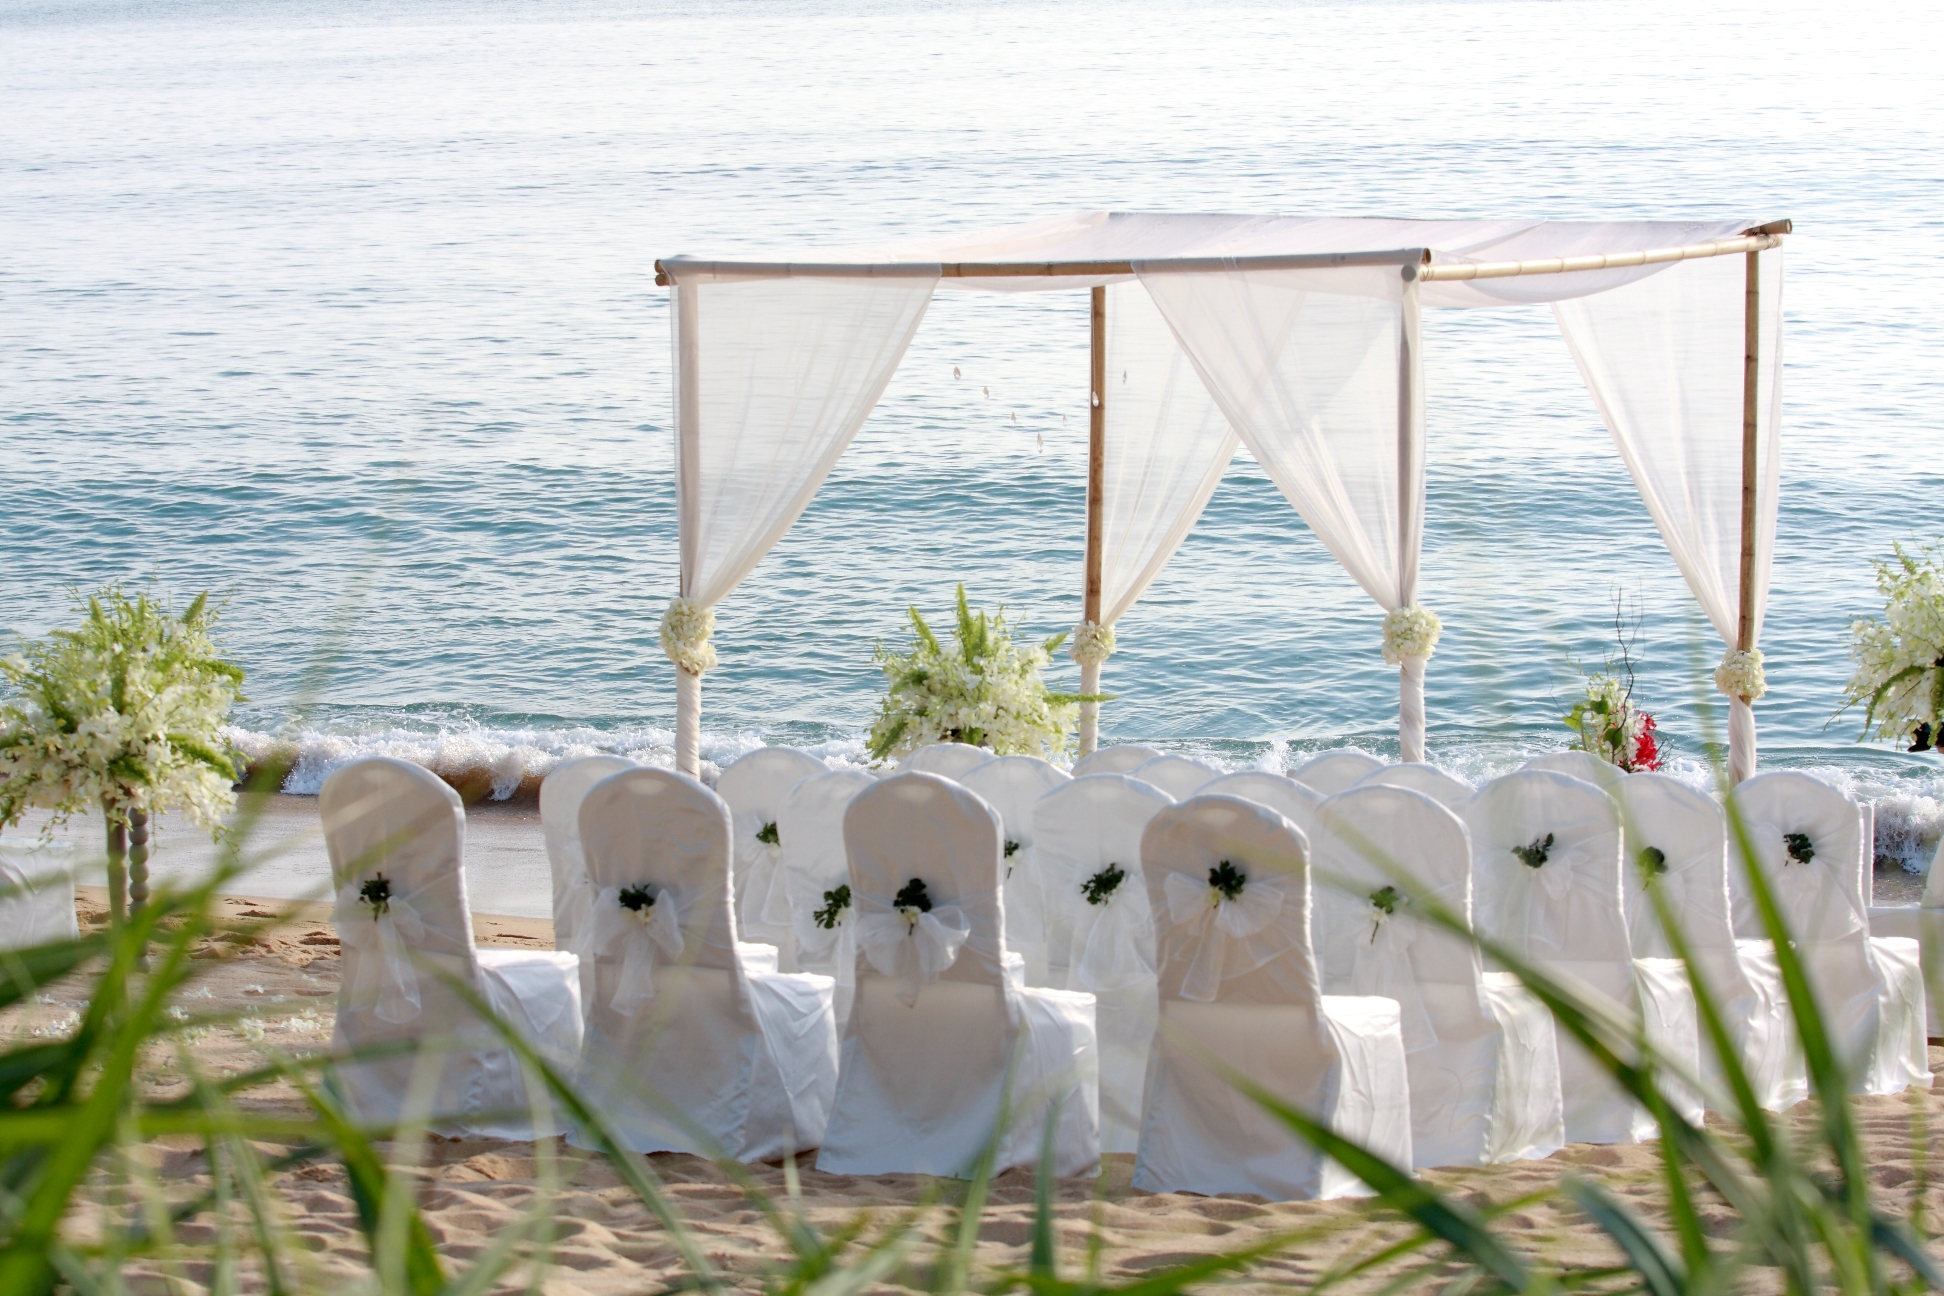 Download this Touching Beach Weddings picture